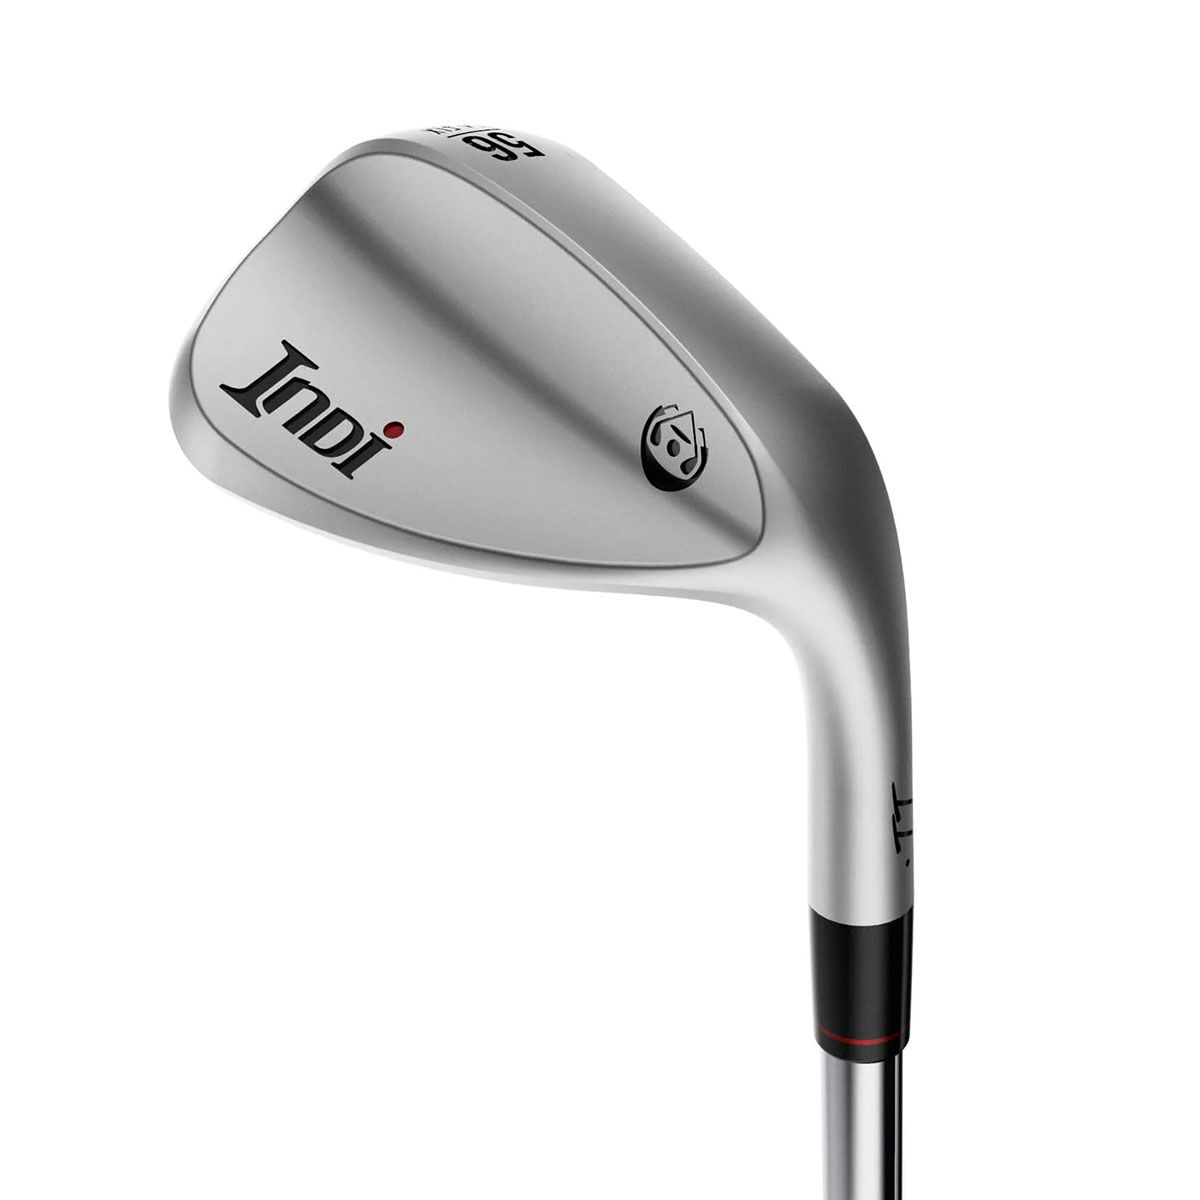 INDI FLX S Grind Steel Golf Wedge, Mens, Right hand, 50 flx grind, Steel | American Golf von Indi Golf